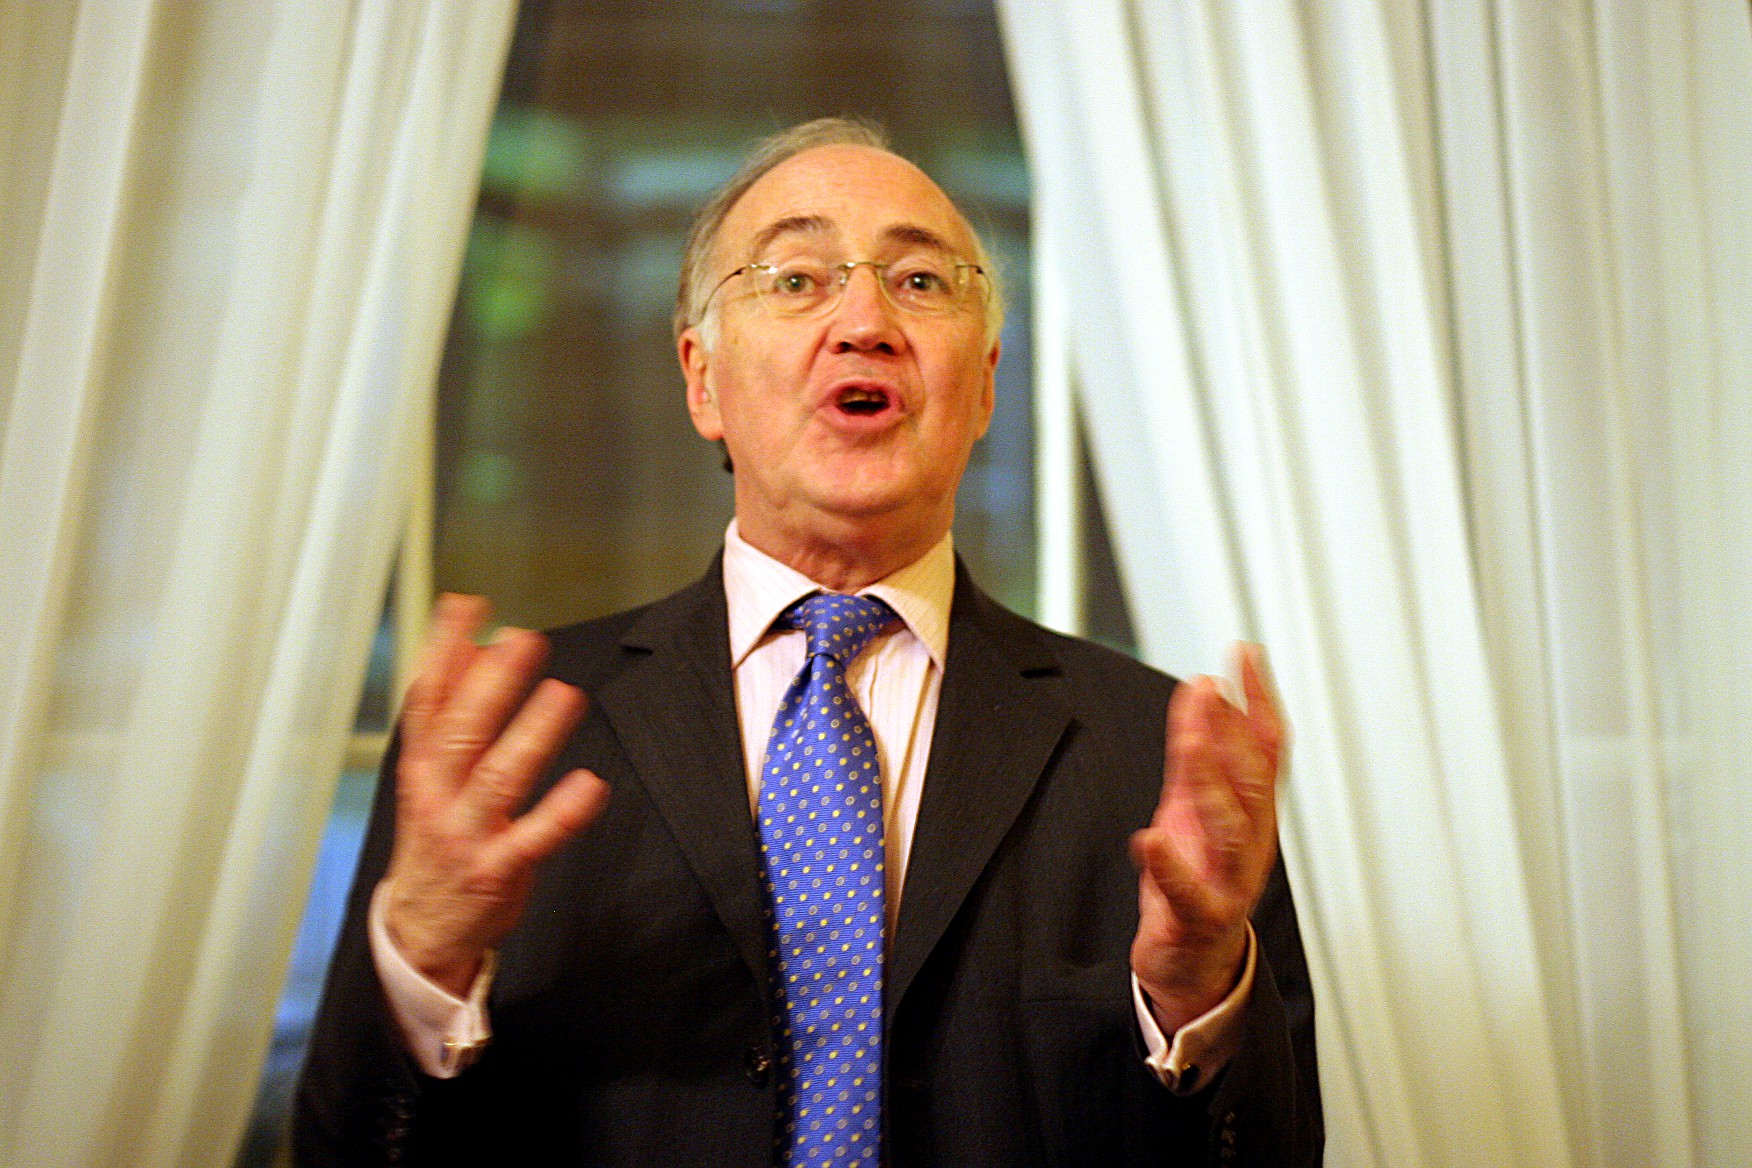 Michael Howard becomes the third former Conservative leader to attack Boris Johnson’s plans